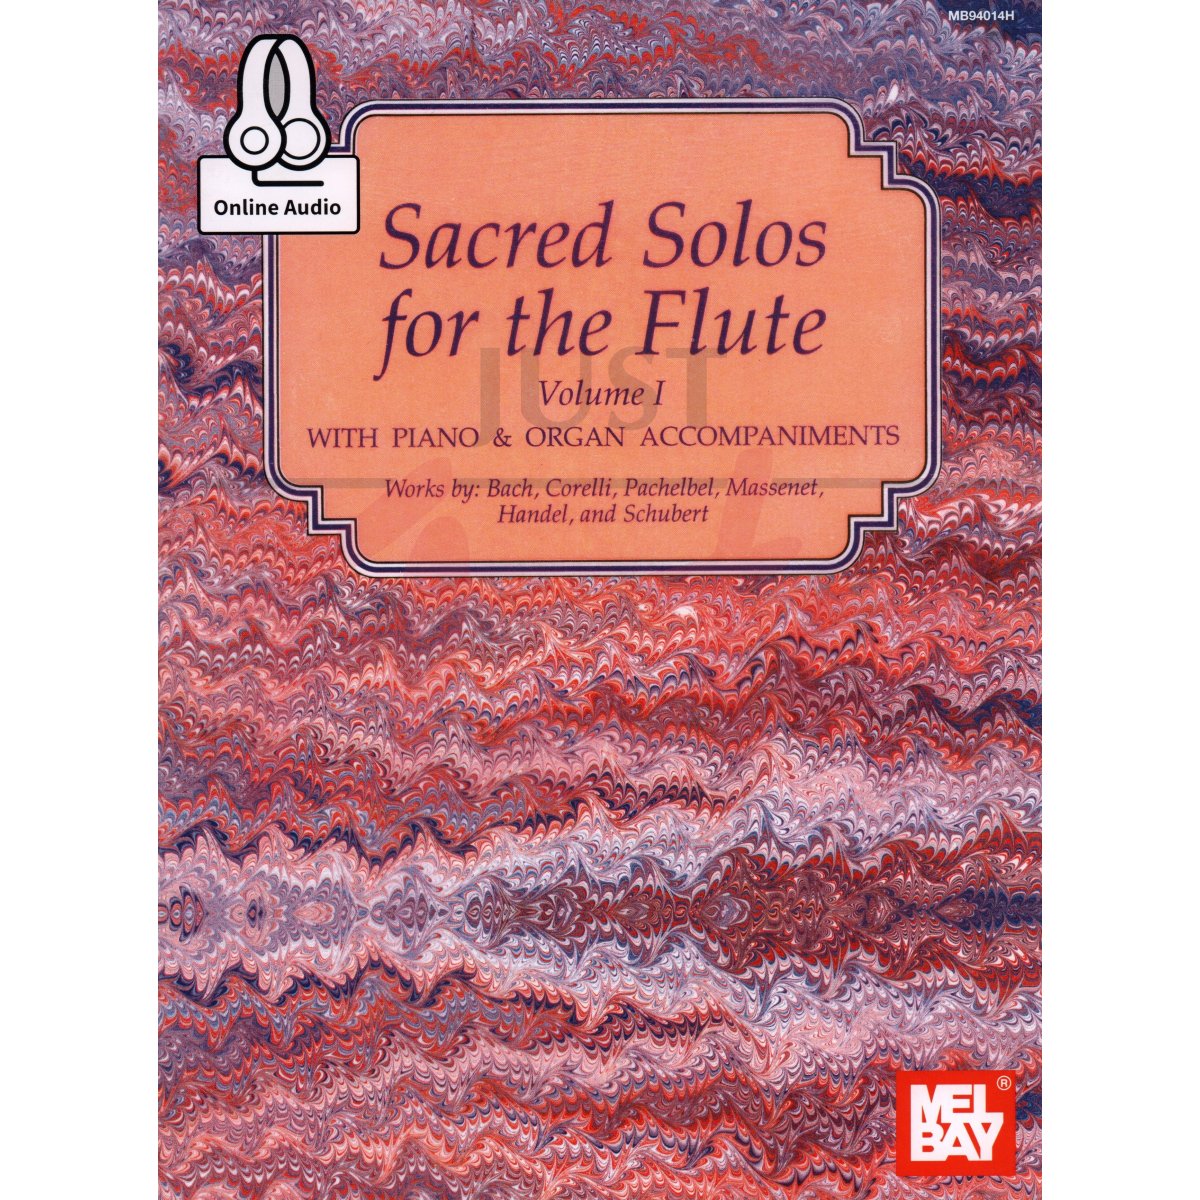 Sacred Solos for the Flute with Piano Accompaniment, Vol 1